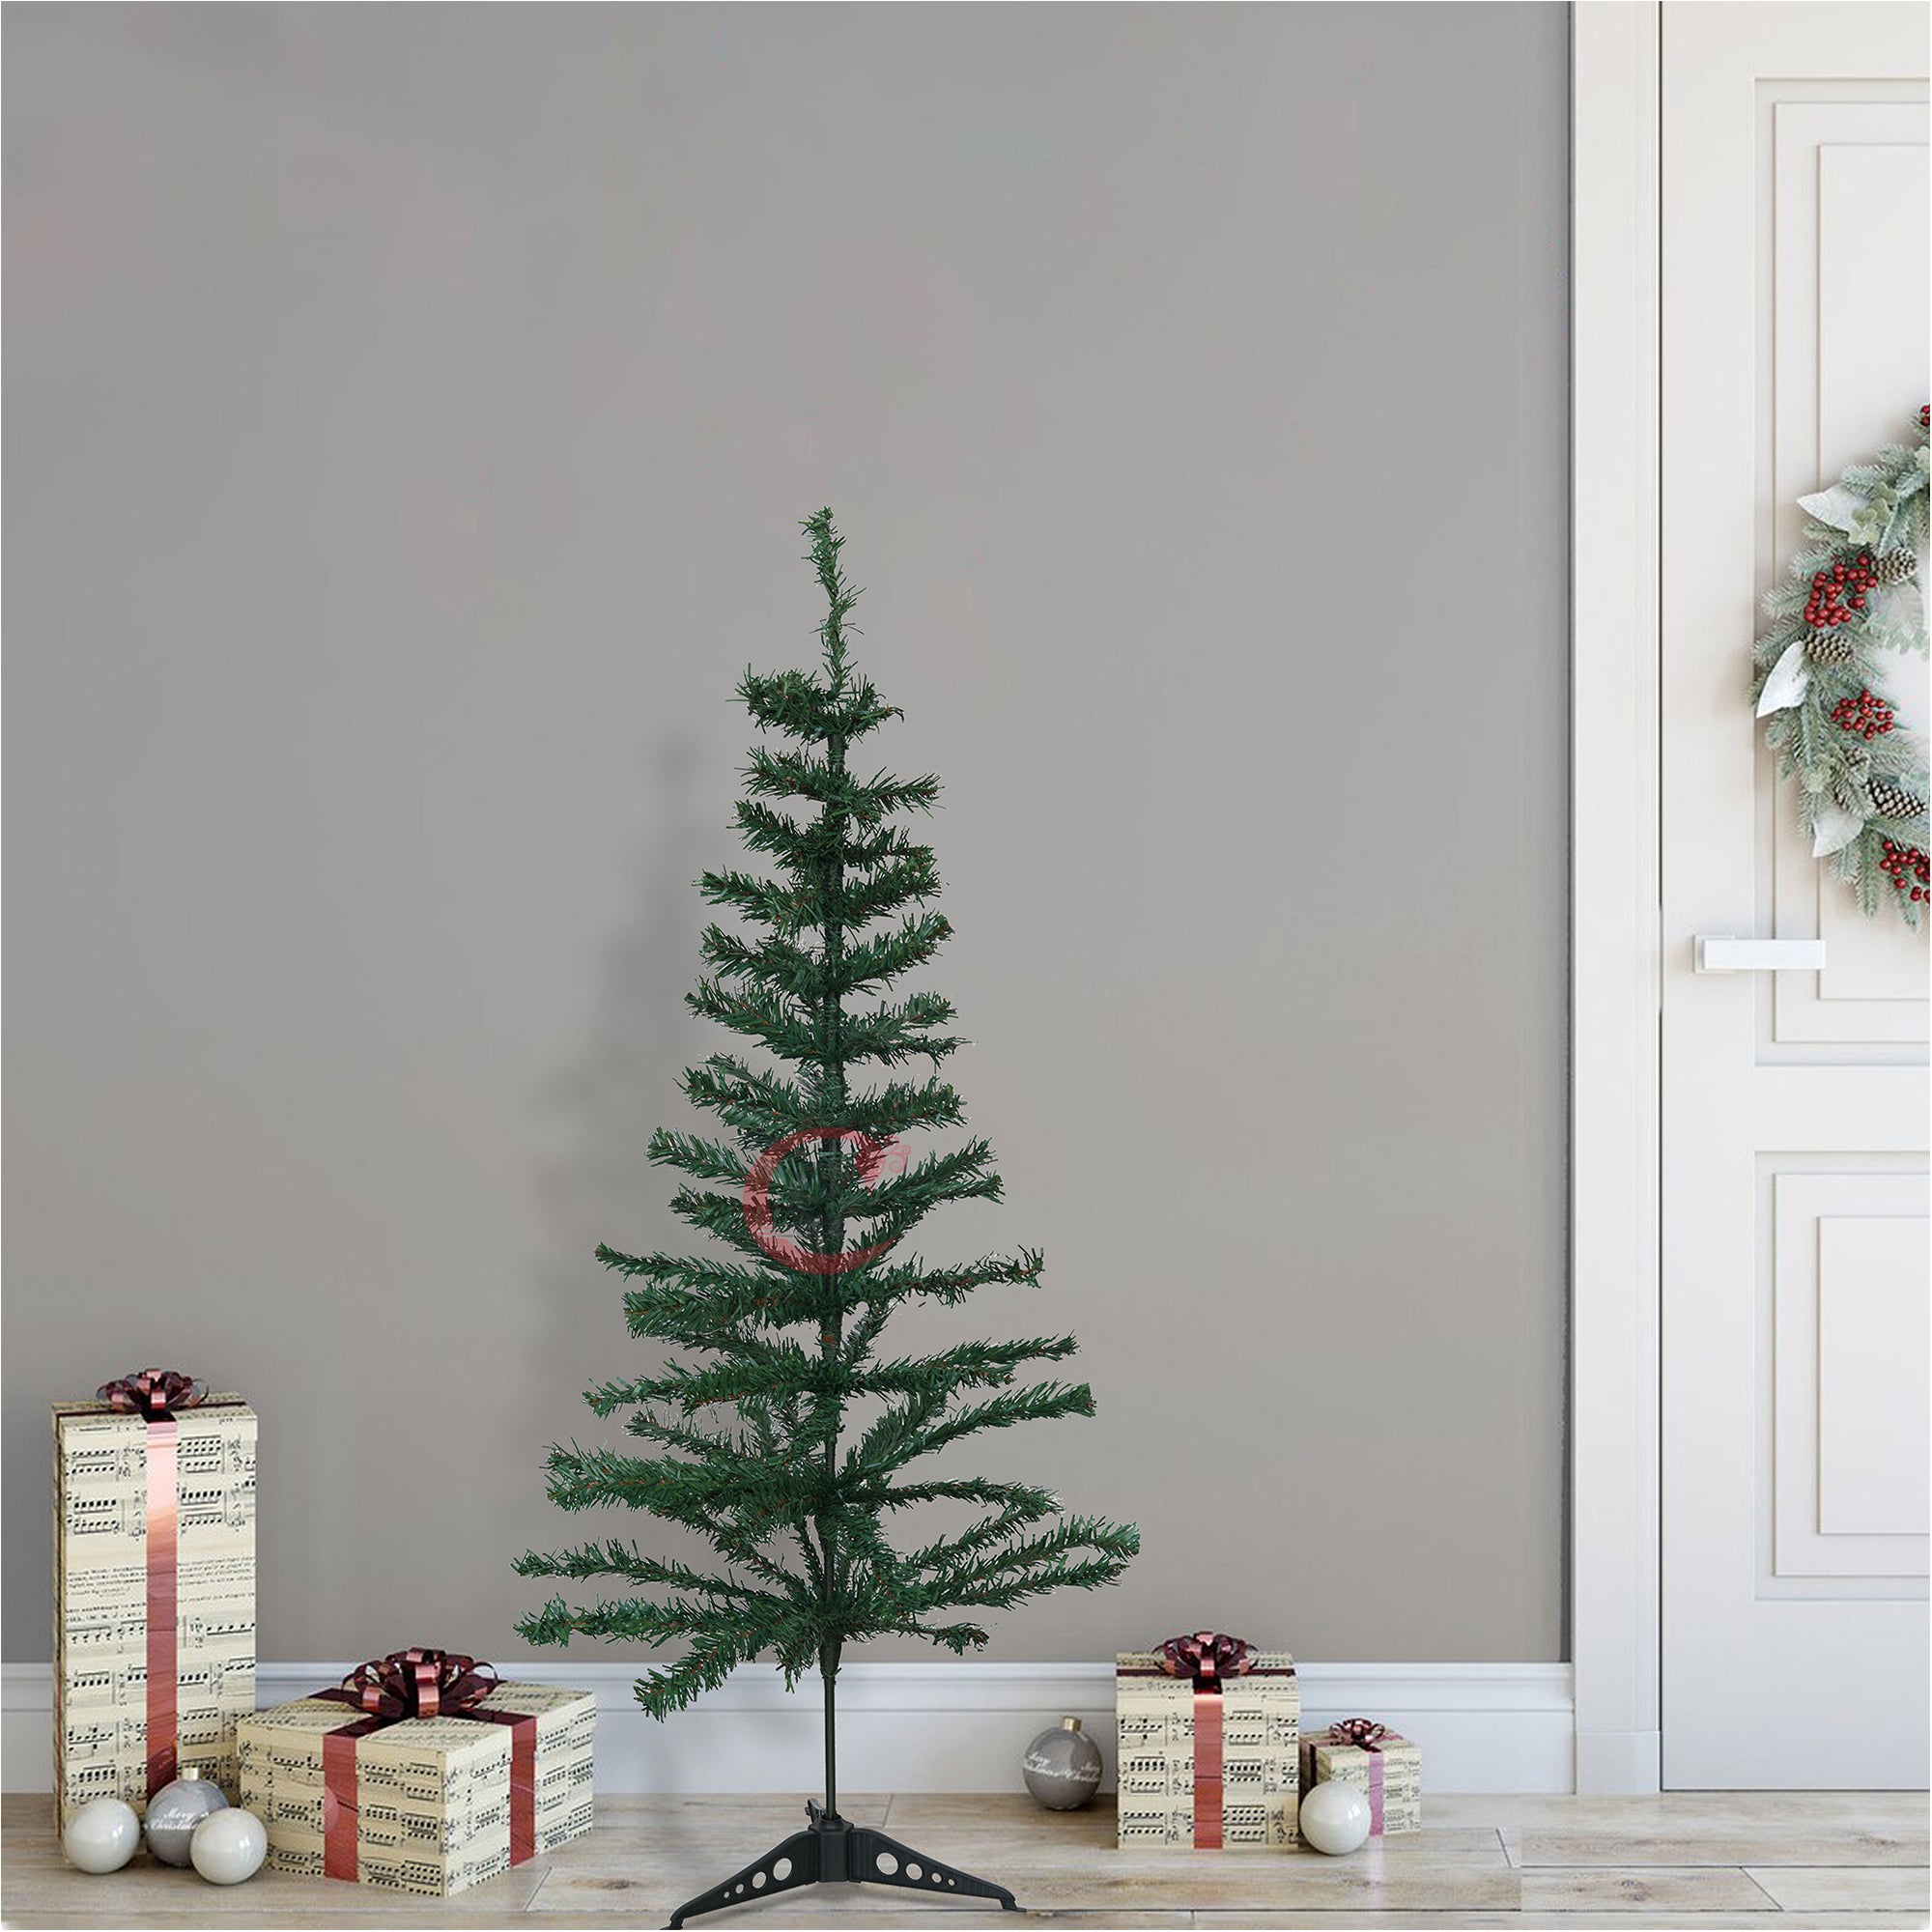 eCraftIndia 4 Feet Green Artificial Christmas Tree Xmas Pine Tree with Metal Stand - Xmas Tree for Indoor, Outdoor, Home, Living Room, Office, Church Decor - Merry Christmas Decoration Item…